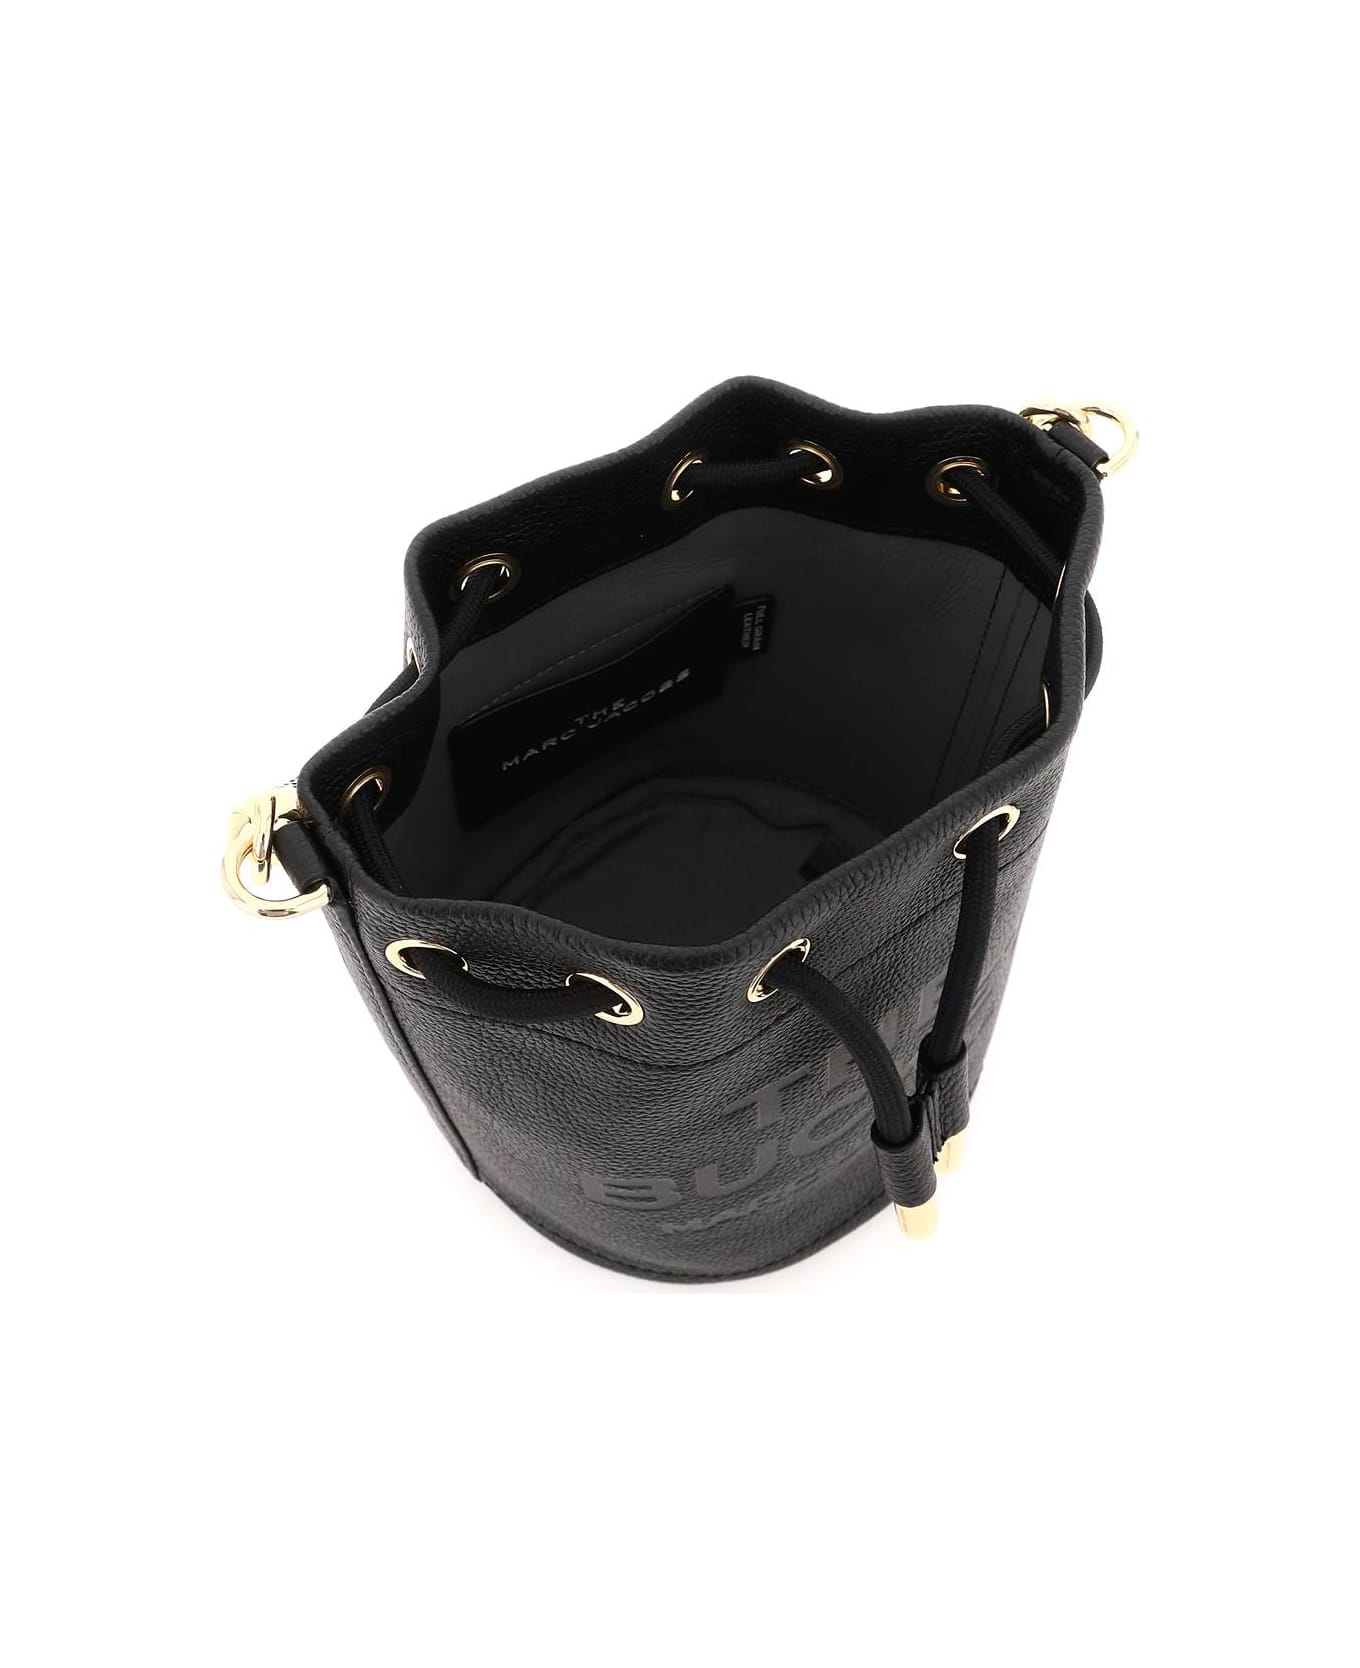 Marc Jacobs The Leather Bucket Bag - BLACK (Black) トートバッグ